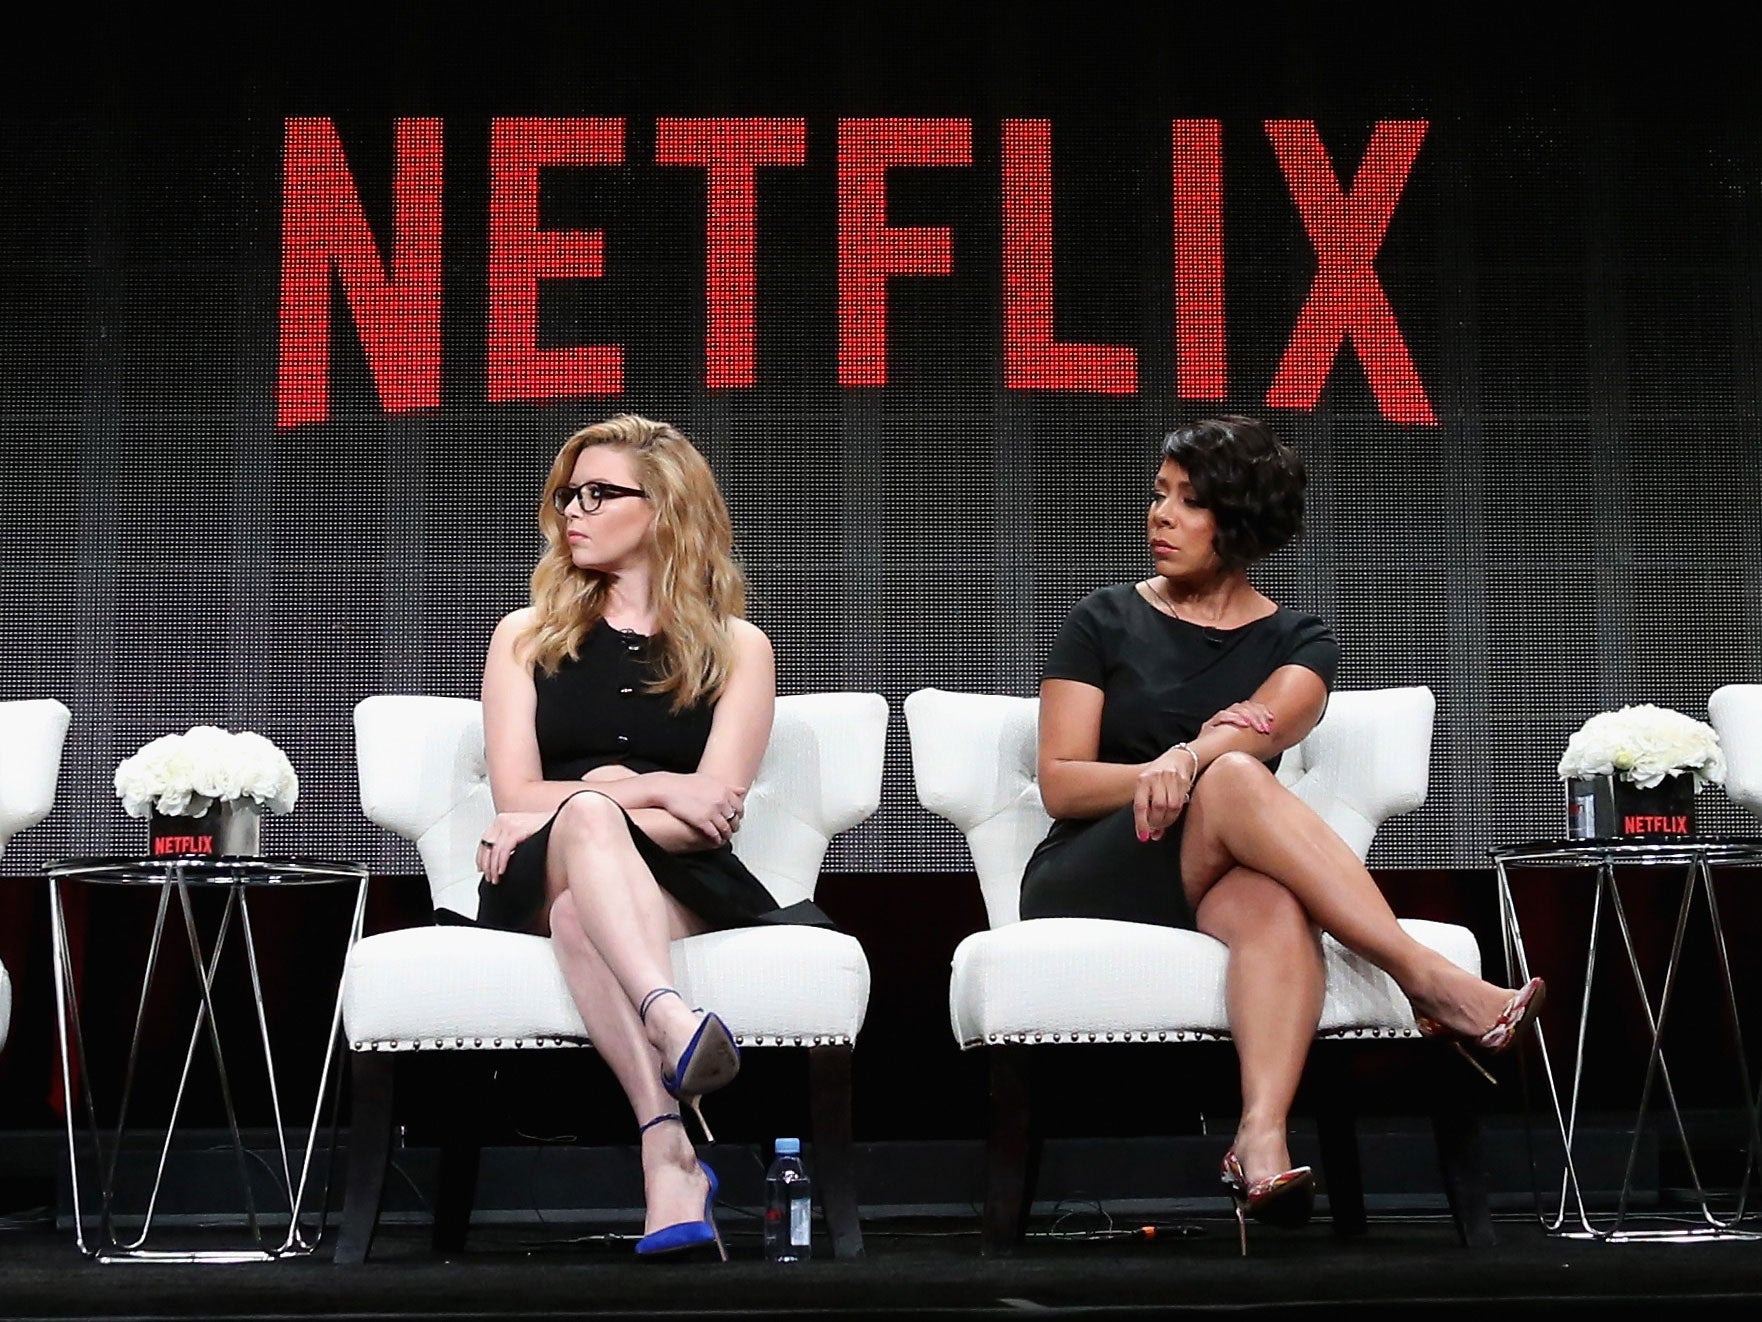 Orange is the New Black actors Natasha Lyonne and Selenis Leyva appear on stage at a panel discussion in July 2015